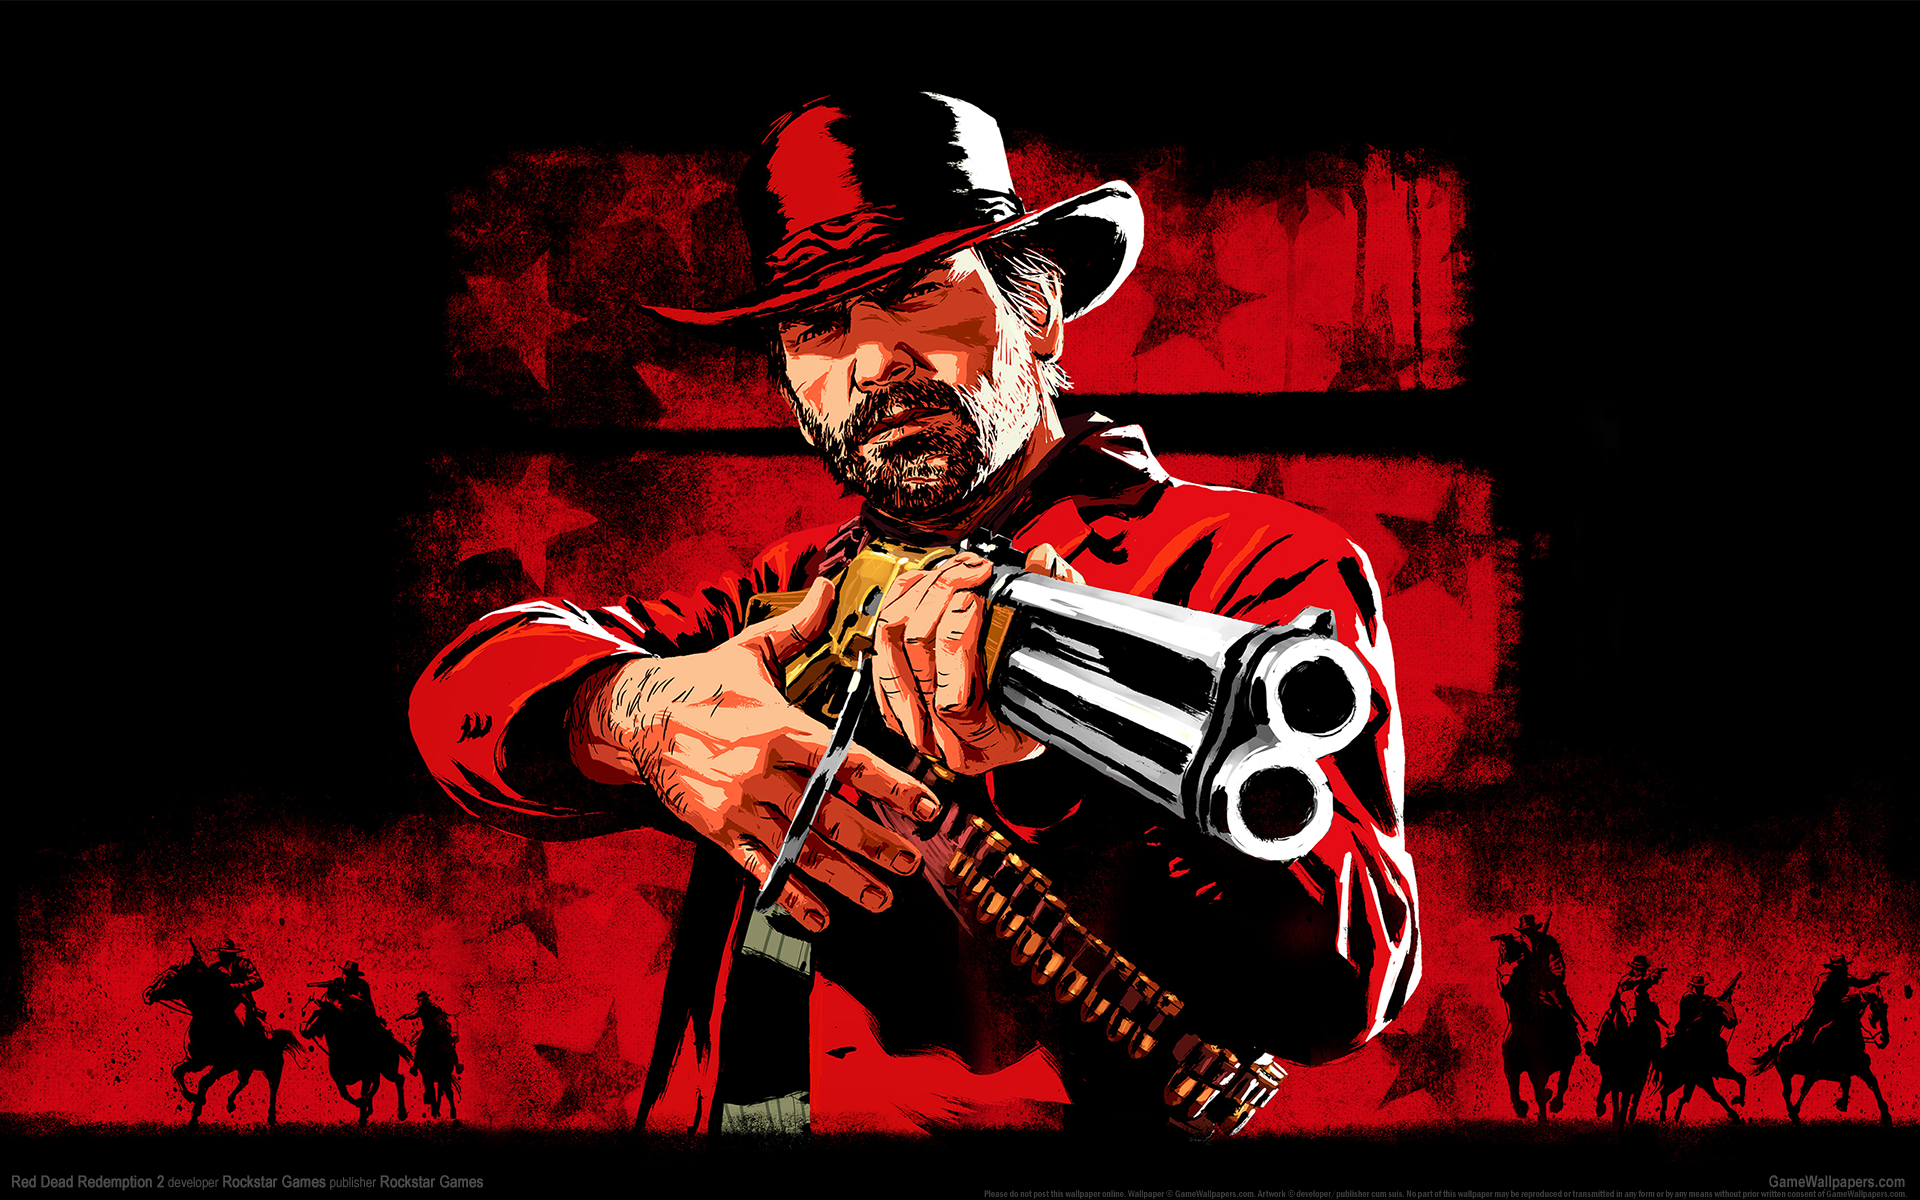 Red Dead Redemption 2 1920x1200 wallpaper or background 04